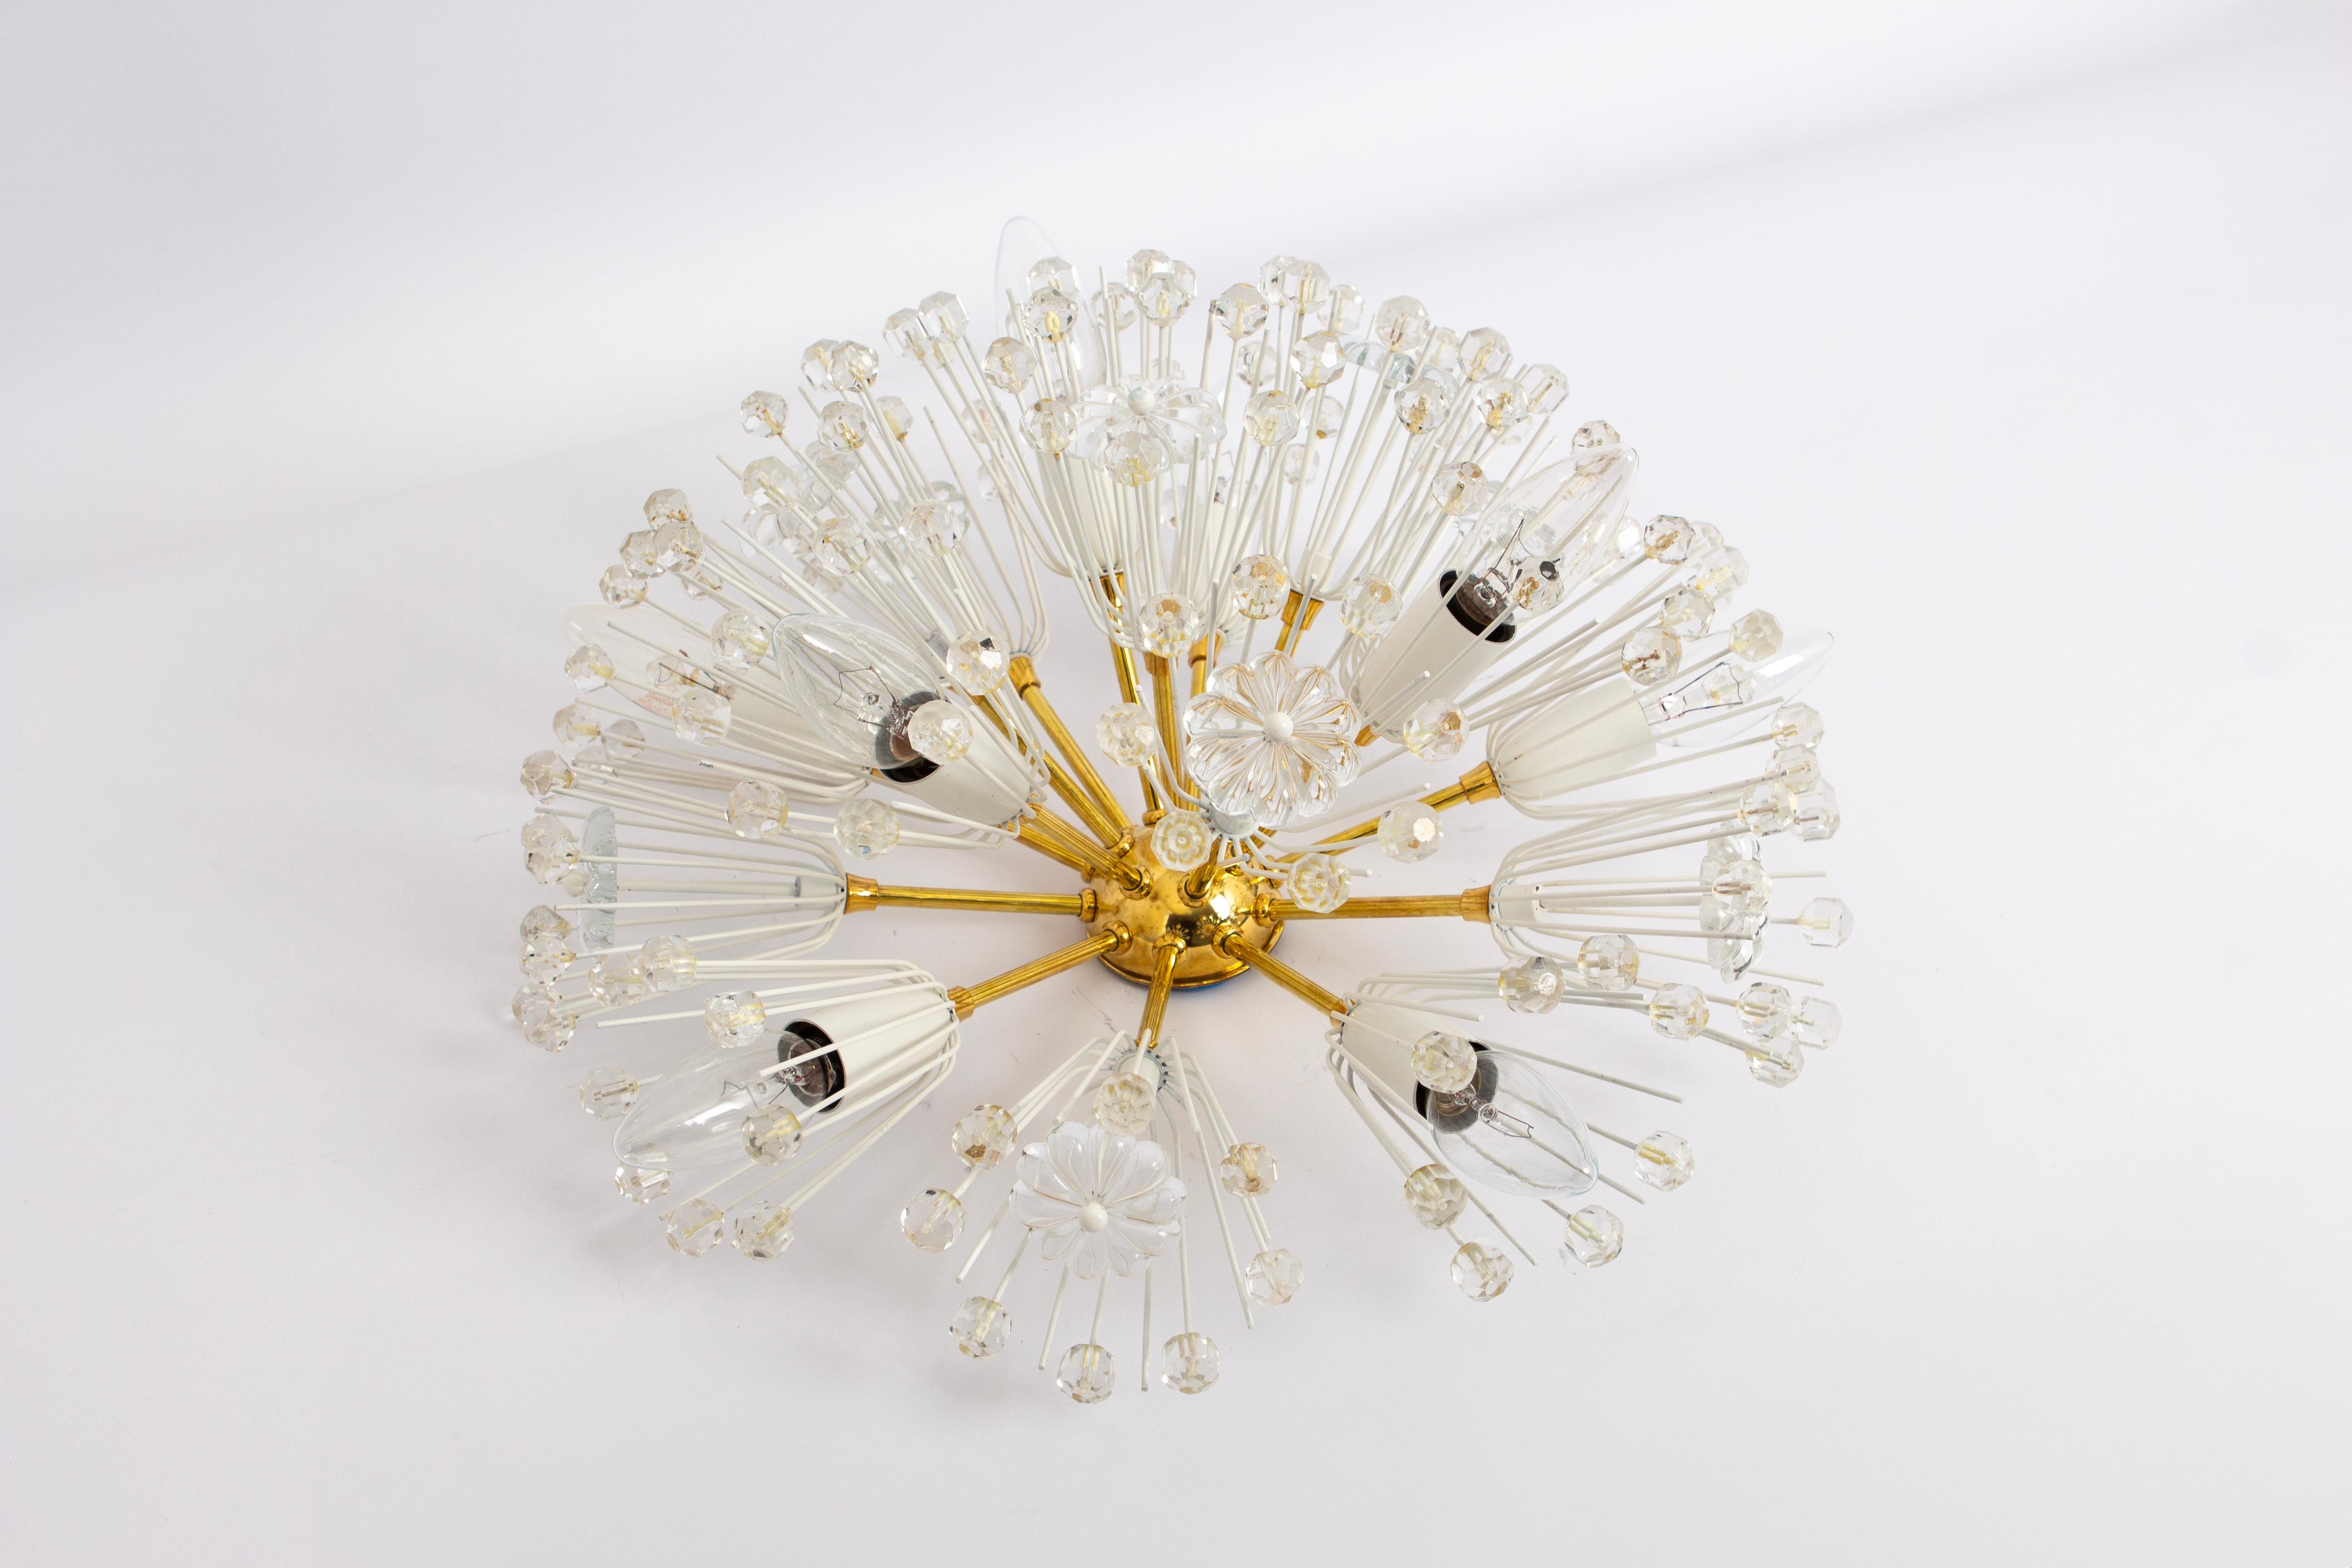 Beautiful starburst brass flush mount with many of crystals designed by Emil Stejnar for Nikoll, manufactured in Austria, circa the 1960s.

Heavy quality and in good condition with small signs of age.
Cleaned, well-wired, and ready to use. The